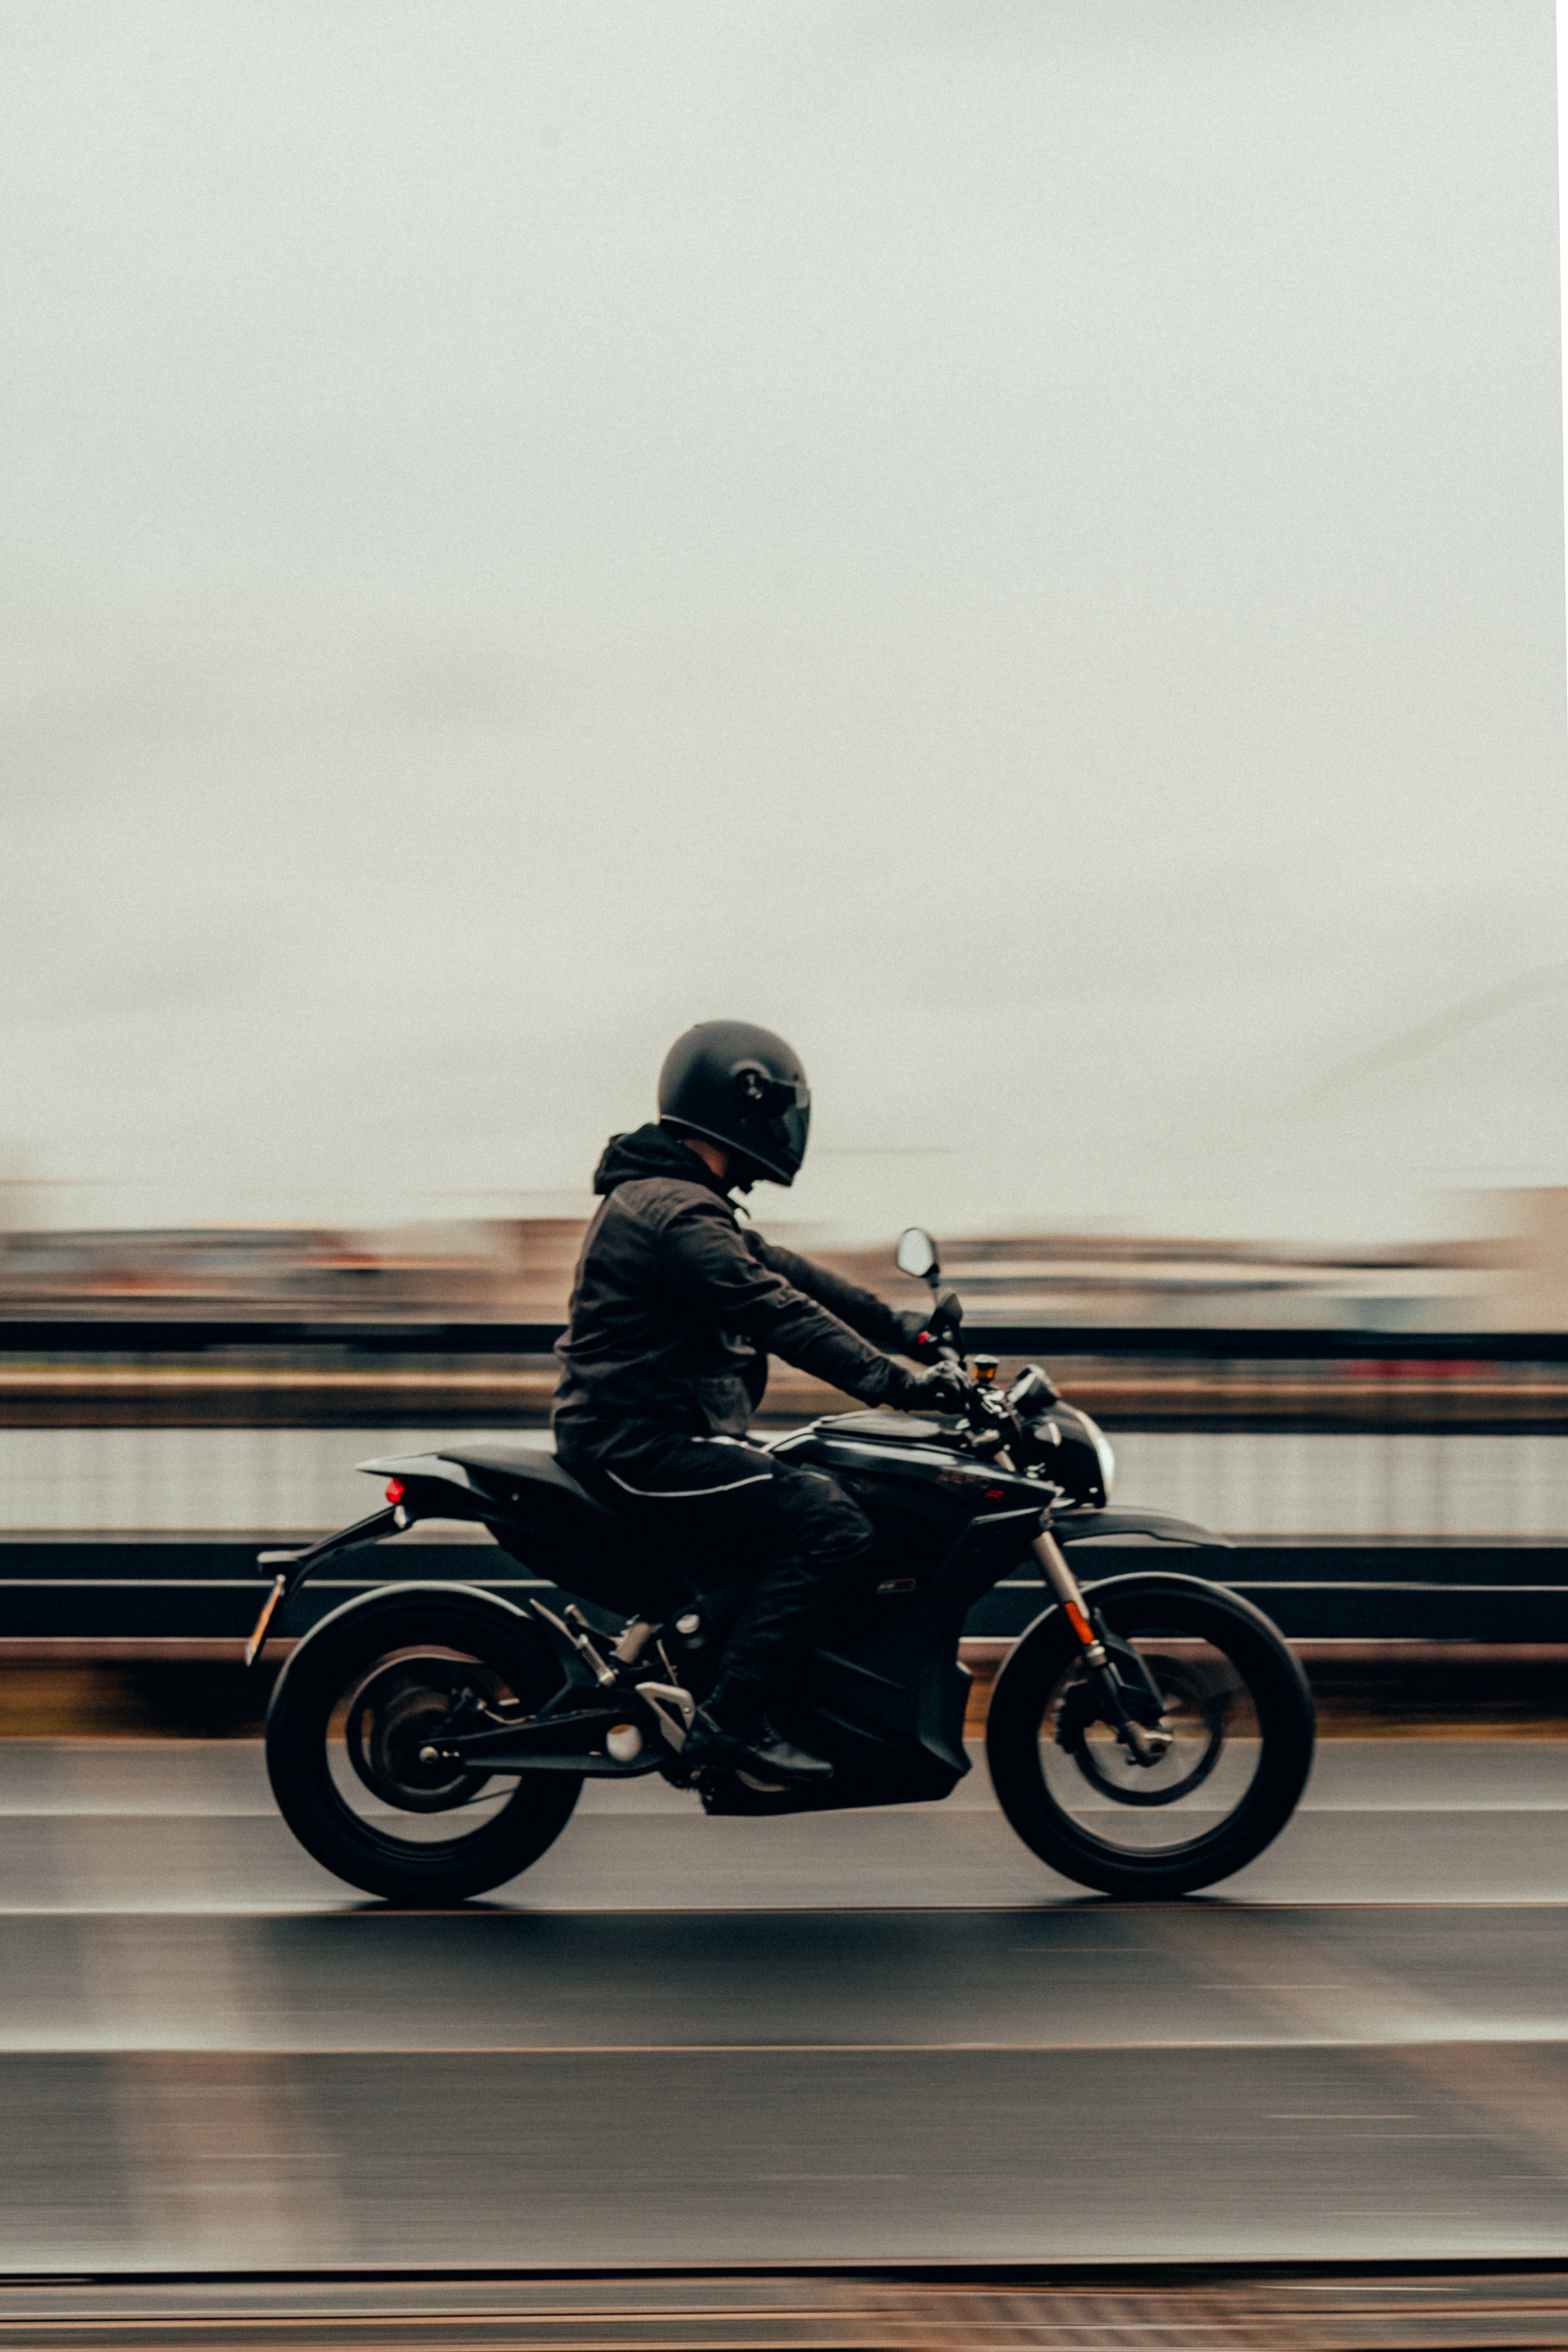 speed, motorcycles, traffic, movement, motorcyclist, motorcycle, race phone background